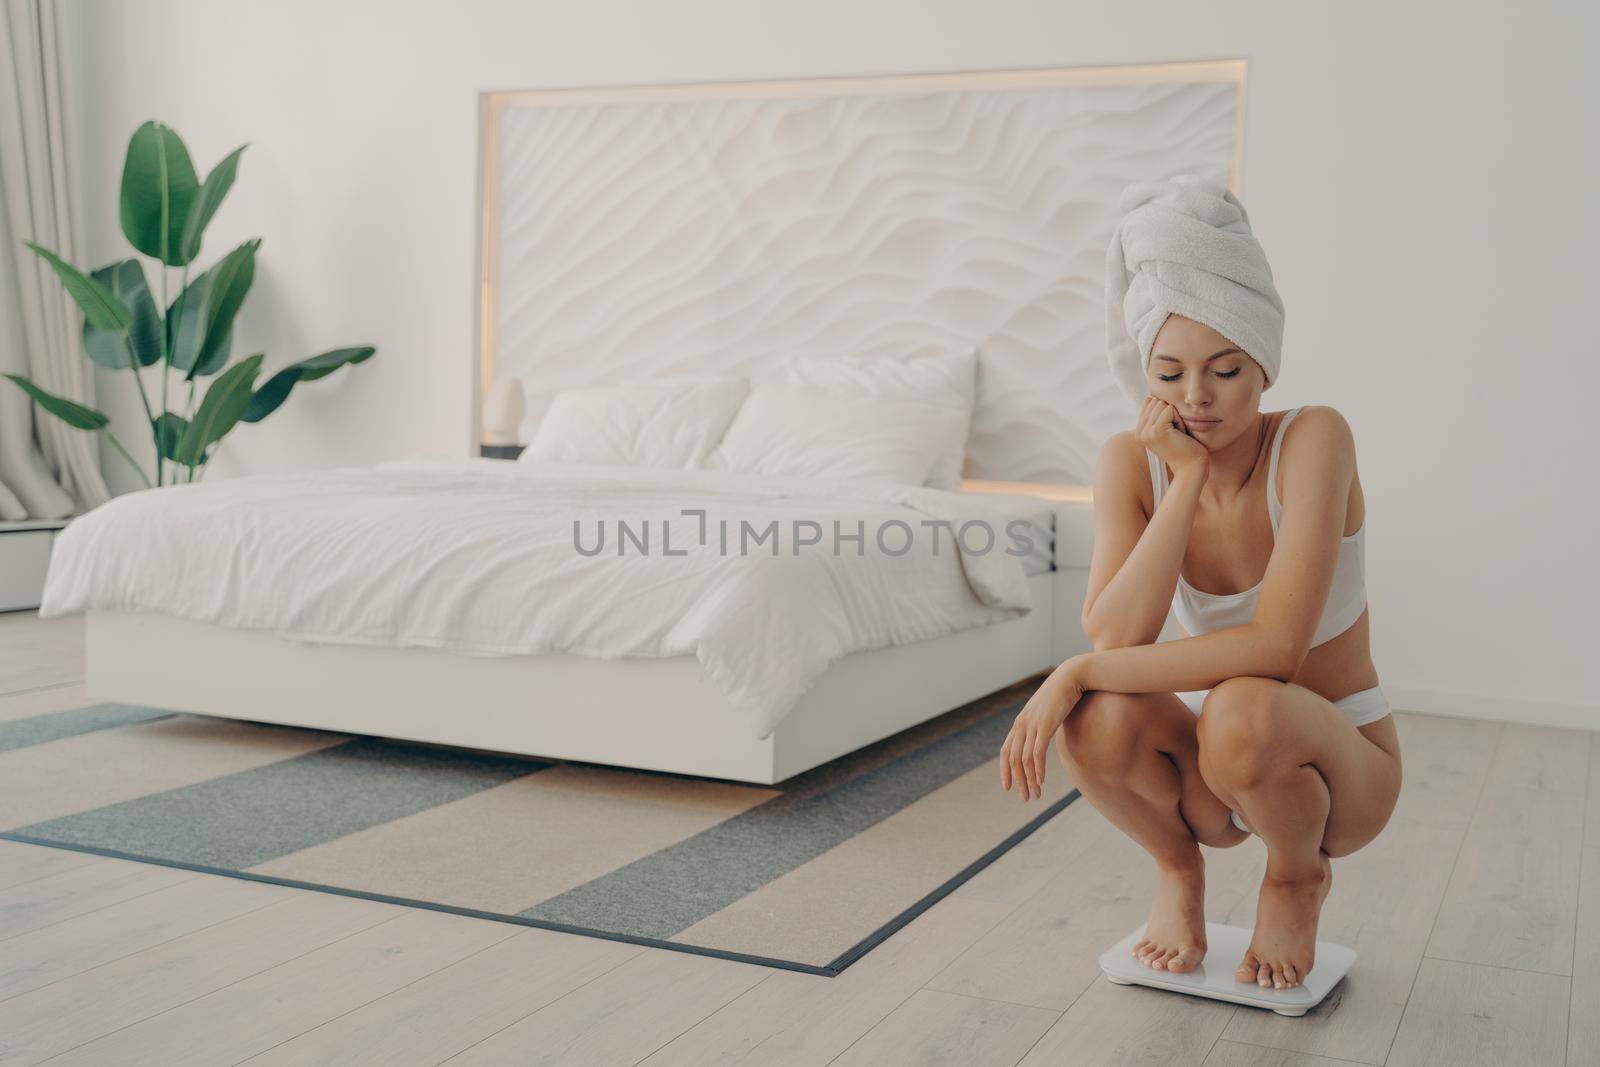 Dissatisfied young shapely woman crouched on scales in stylish light colored bedroom by vkstock